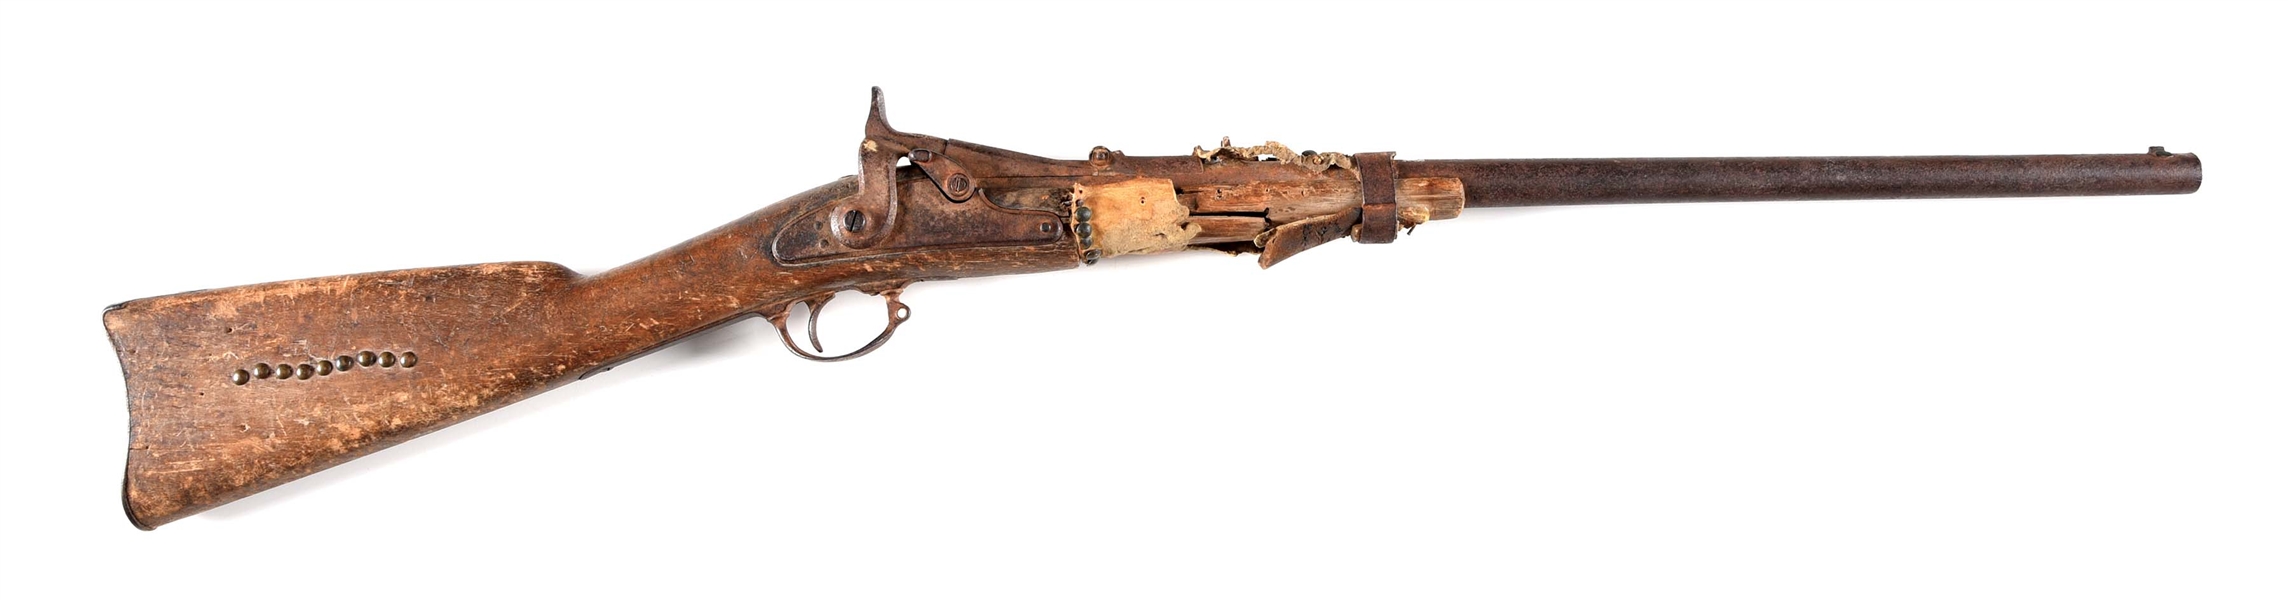 (A) "AS FOUND" INDIAN RIFLE - TRAPDOOR SPRINGFIELD CARBINE WITH TACK DECORATION.